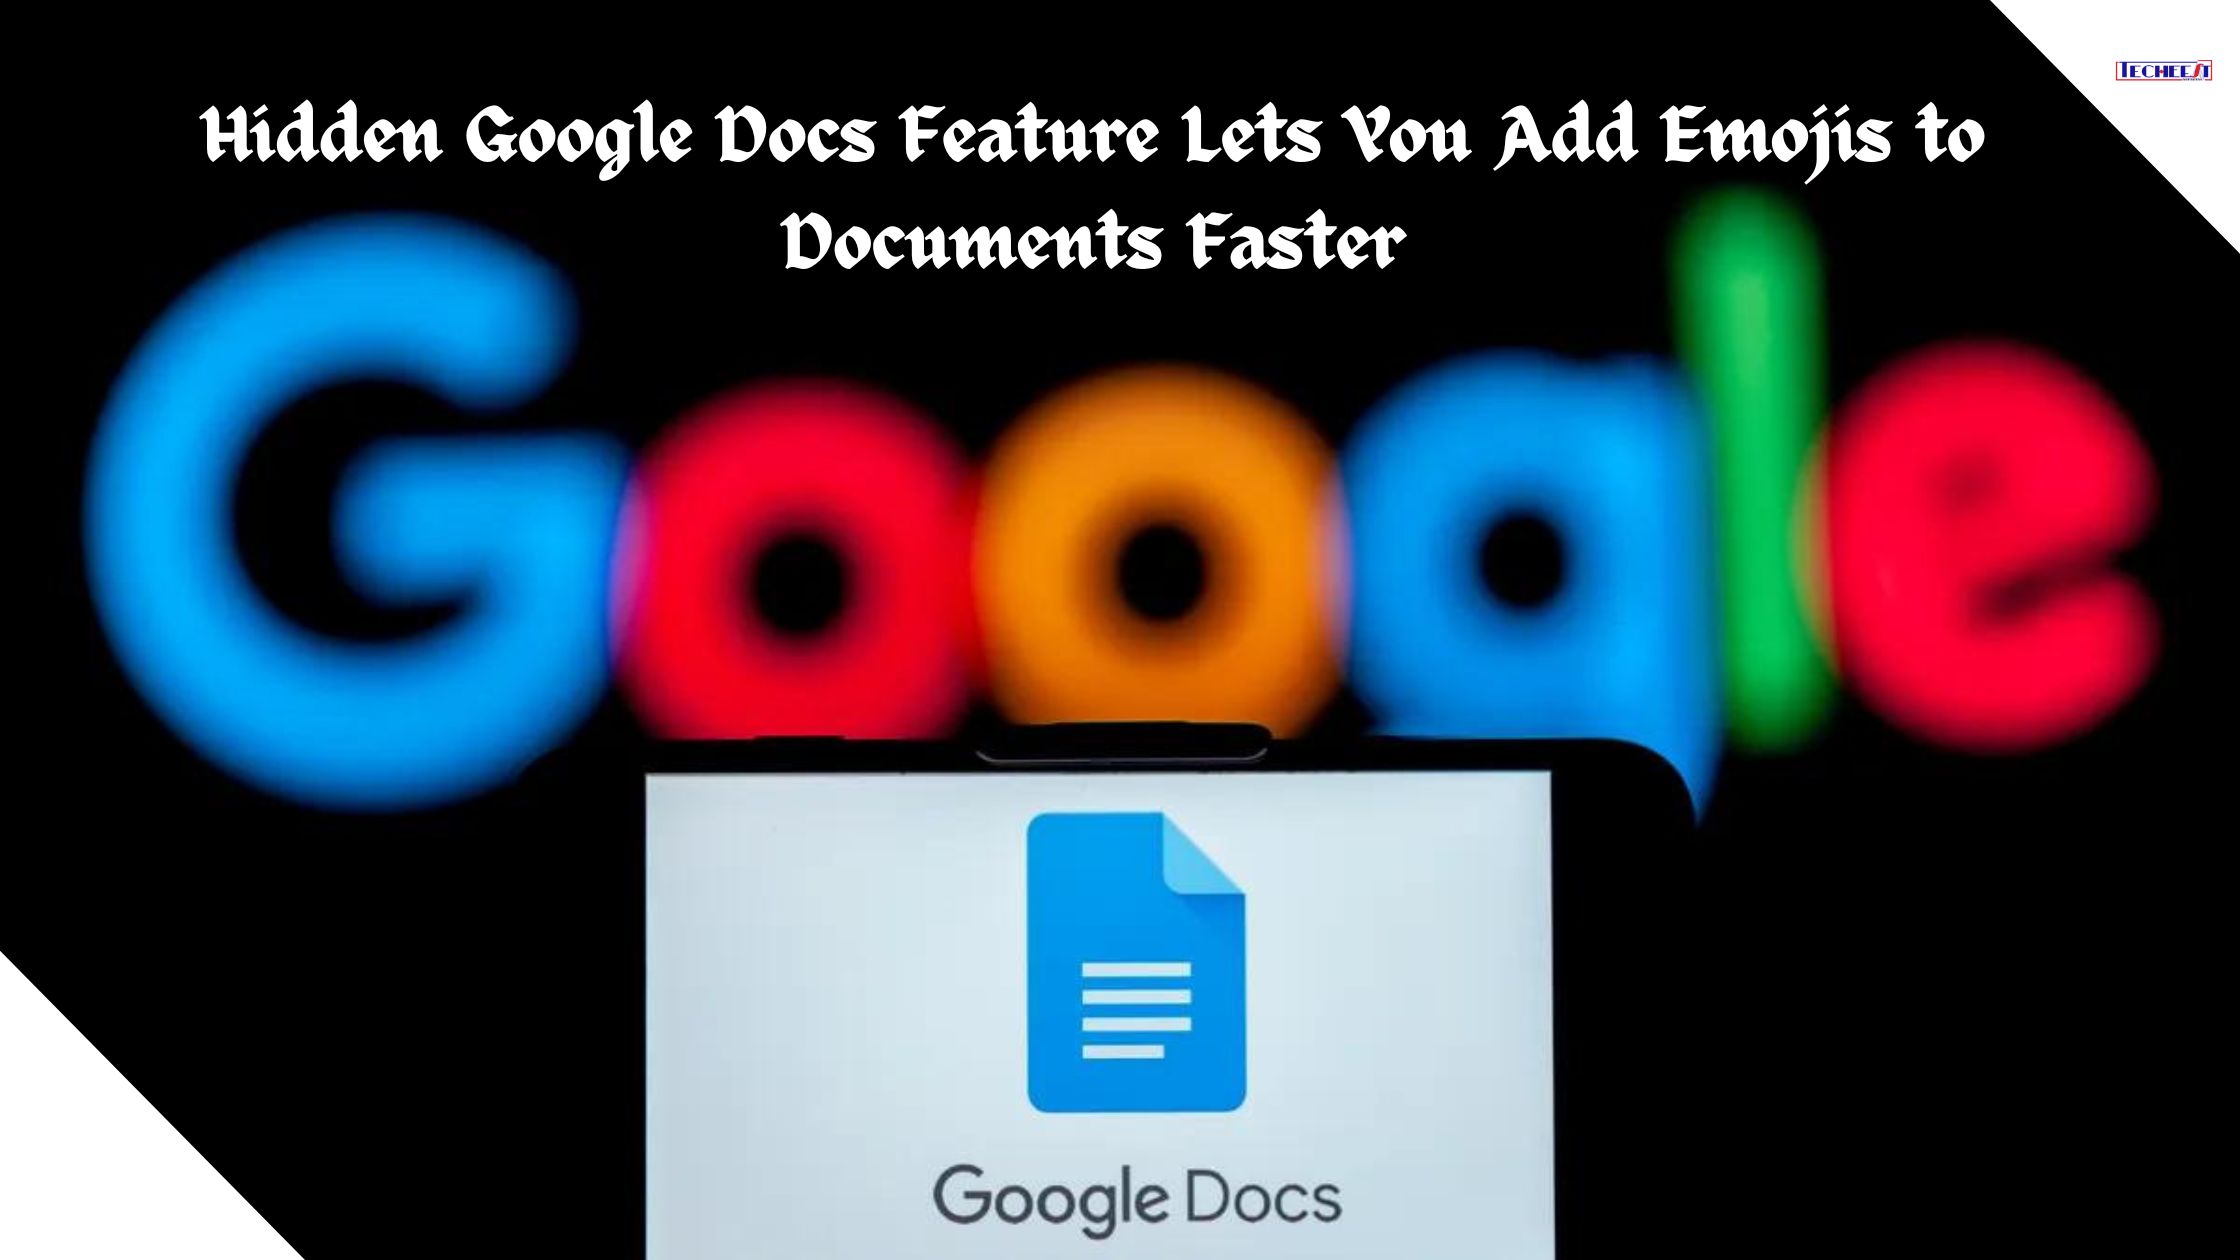 Hidden Google Docs Feature Lets You Add Emojis to Documents Faster